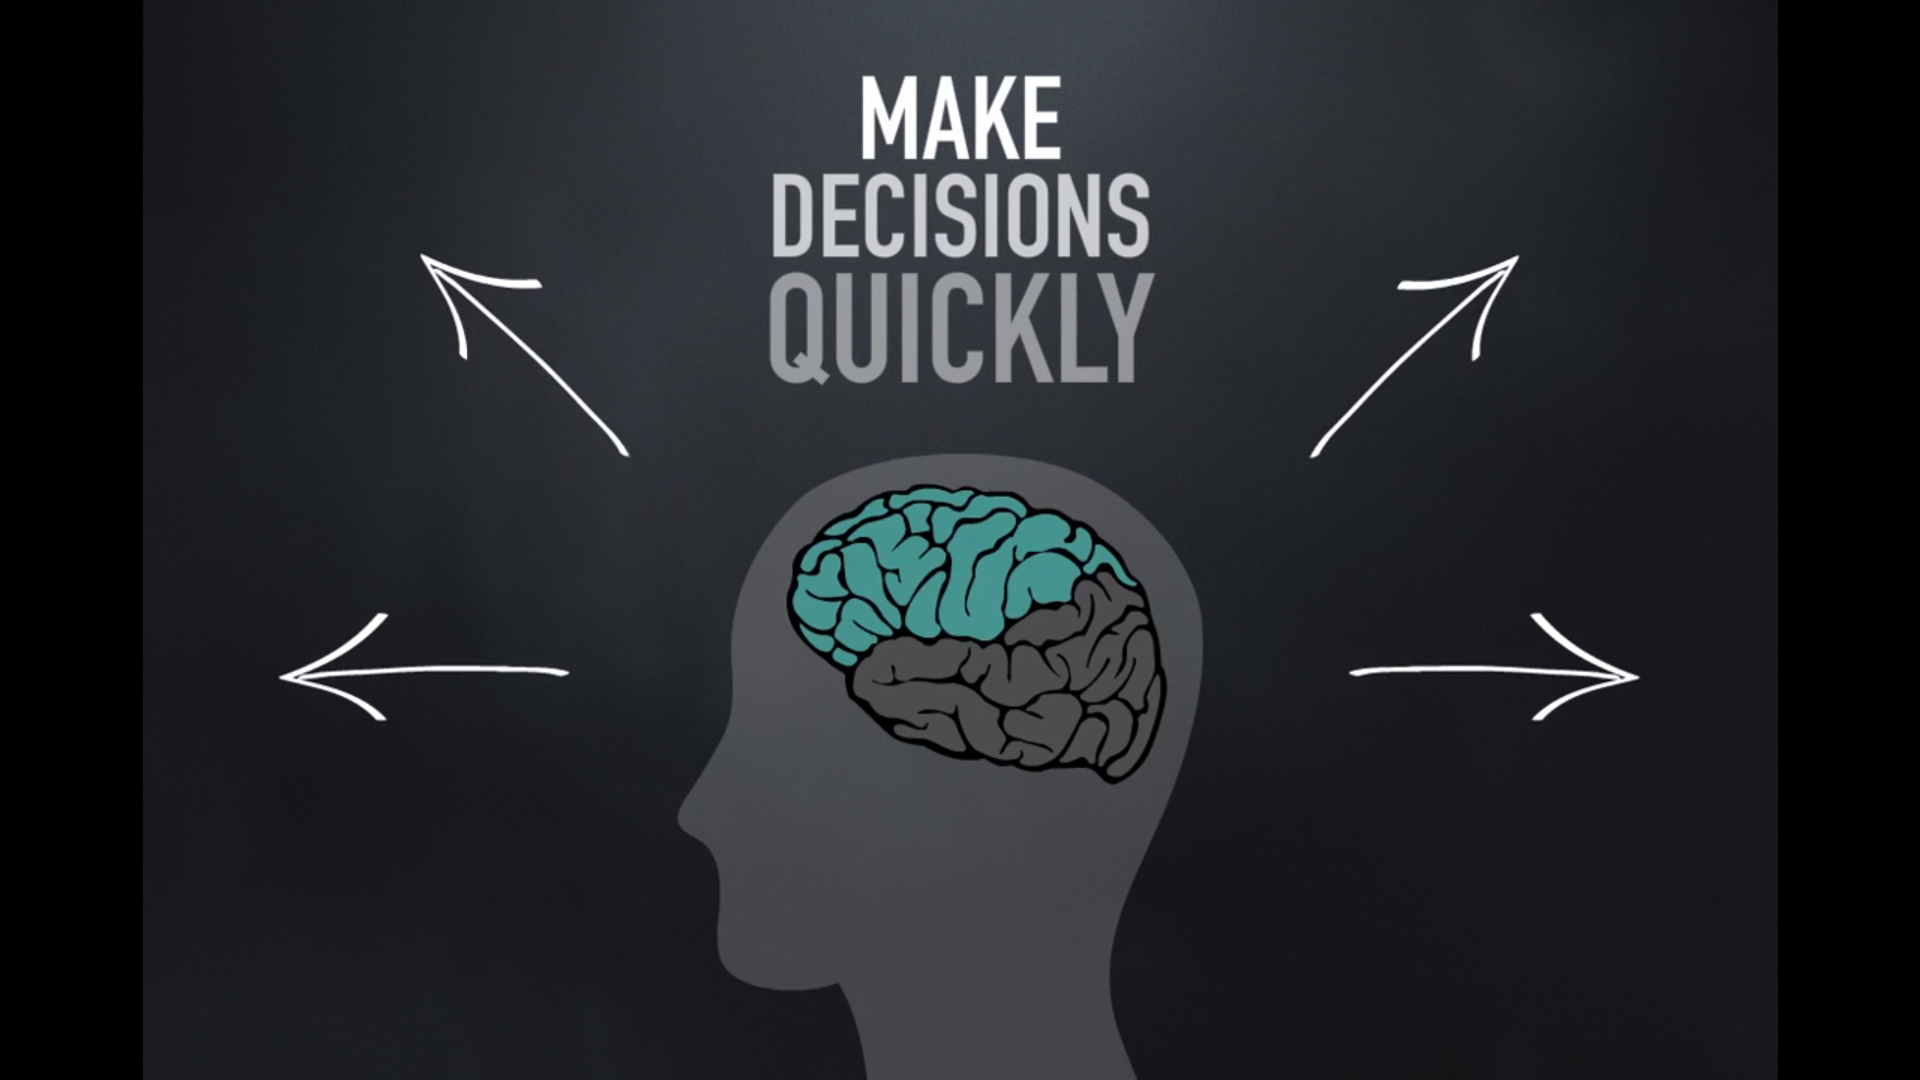 Unconscious Bias Decision Making - Marshall Elearning Courses